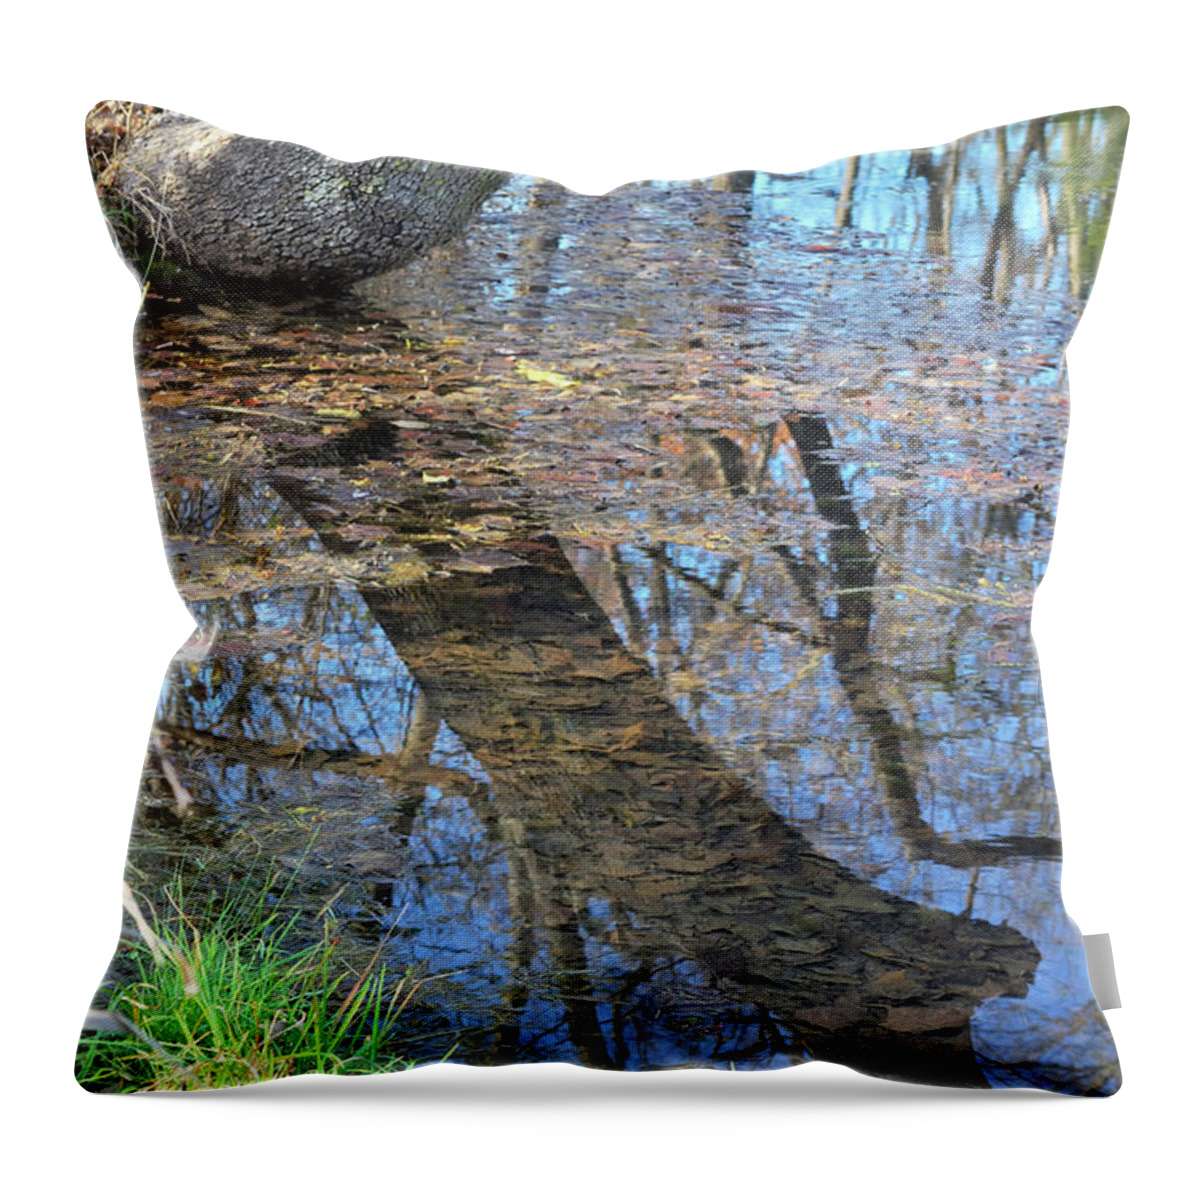 Pond Throw Pillow featuring the photograph Reflections I by Ron Cline